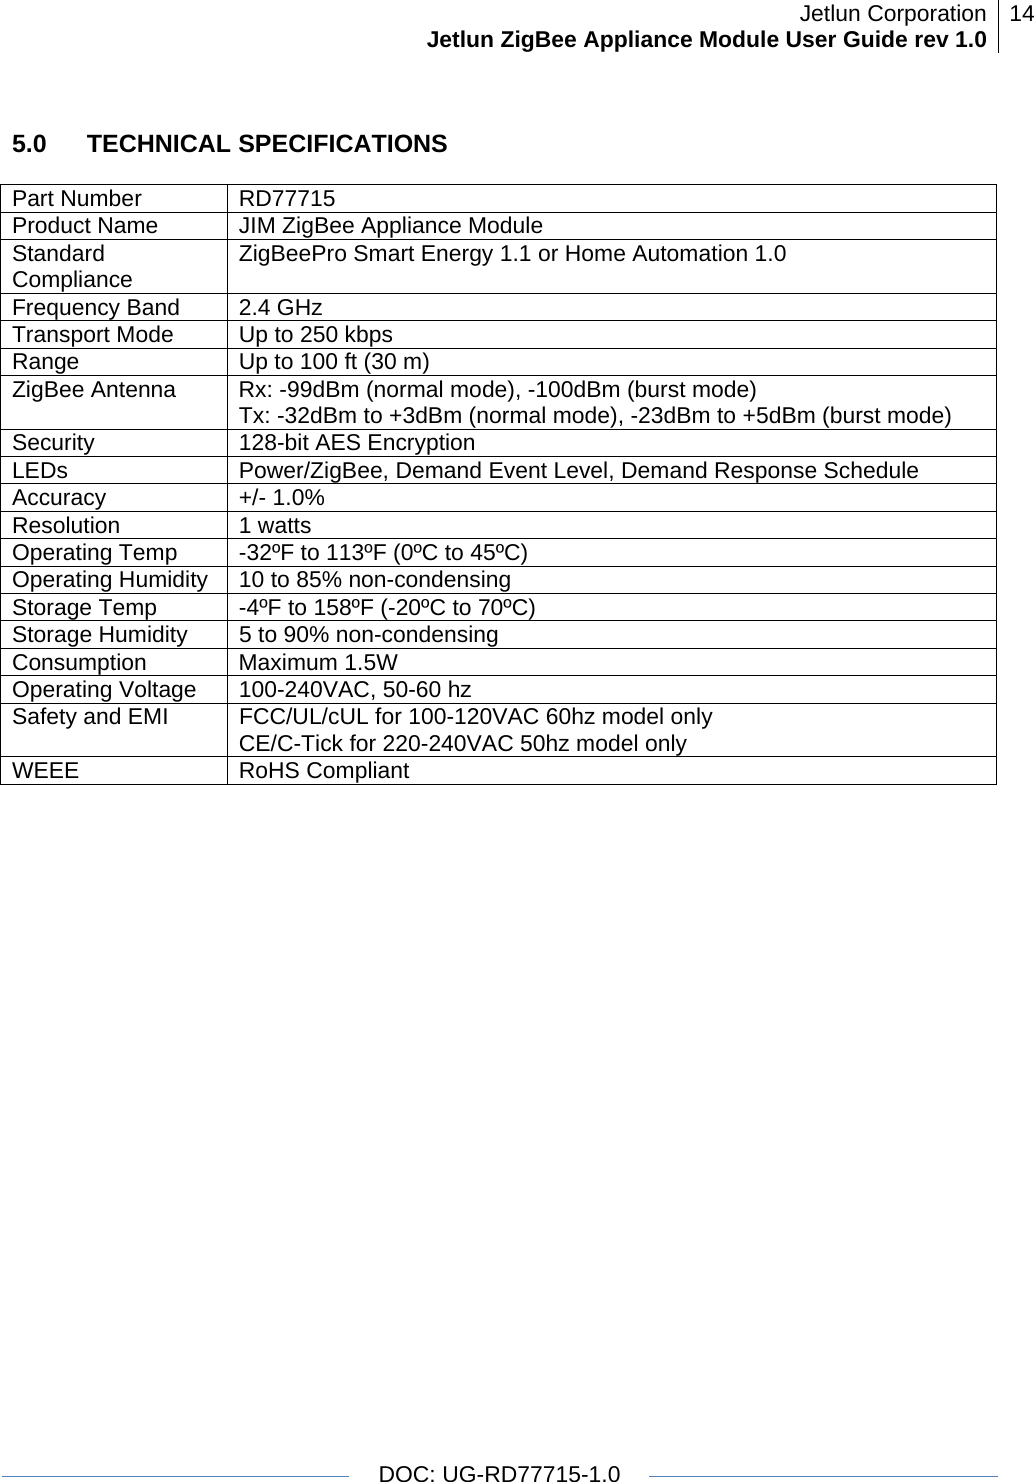 Jetlun CorporationJetlun ZigBee Appliance Module User Guide rev 1.0 14   DOC: UG-RD77715-1.0  5.0   TECHNICAL SPECIFICATIONS  Part Number  RD77715 Product Name  JIM ZigBee Appliance Module Standard Compliance  ZigBeePro Smart Energy 1.1 or Home Automation 1.0 Frequency Band  2.4 GHz Transport Mode   Up to 250 kbps  Range  Up to 100 ft (30 m) ZigBee Antenna  Rx: -99dBm (normal mode), -100dBm (burst mode) Tx: -32dBm to +3dBm (normal mode), -23dBm to +5dBm (burst mode) Security  128-bit AES Encryption LEDs  Power/ZigBee, Demand Event Level, Demand Response Schedule Accuracy +/- 1.0% Resolution 1 watts Operating Temp  -32ºF to 113ºF (0ºC to 45ºC) Operating Humidity  10 to 85% non-condensing Storage Temp  -4ºF to 158ºF (-20ºC to 70ºC) Storage Humidity  5 to 90% non-condensing Consumption Maximum 1.5W Operating Voltage  100-240VAC, 50-60 hz Safety and EMI  FCC/UL/cUL for 100-120VAC 60hz model only CE/C-Tick for 220-240VAC 50hz model only WEEE RoHS Compliant 